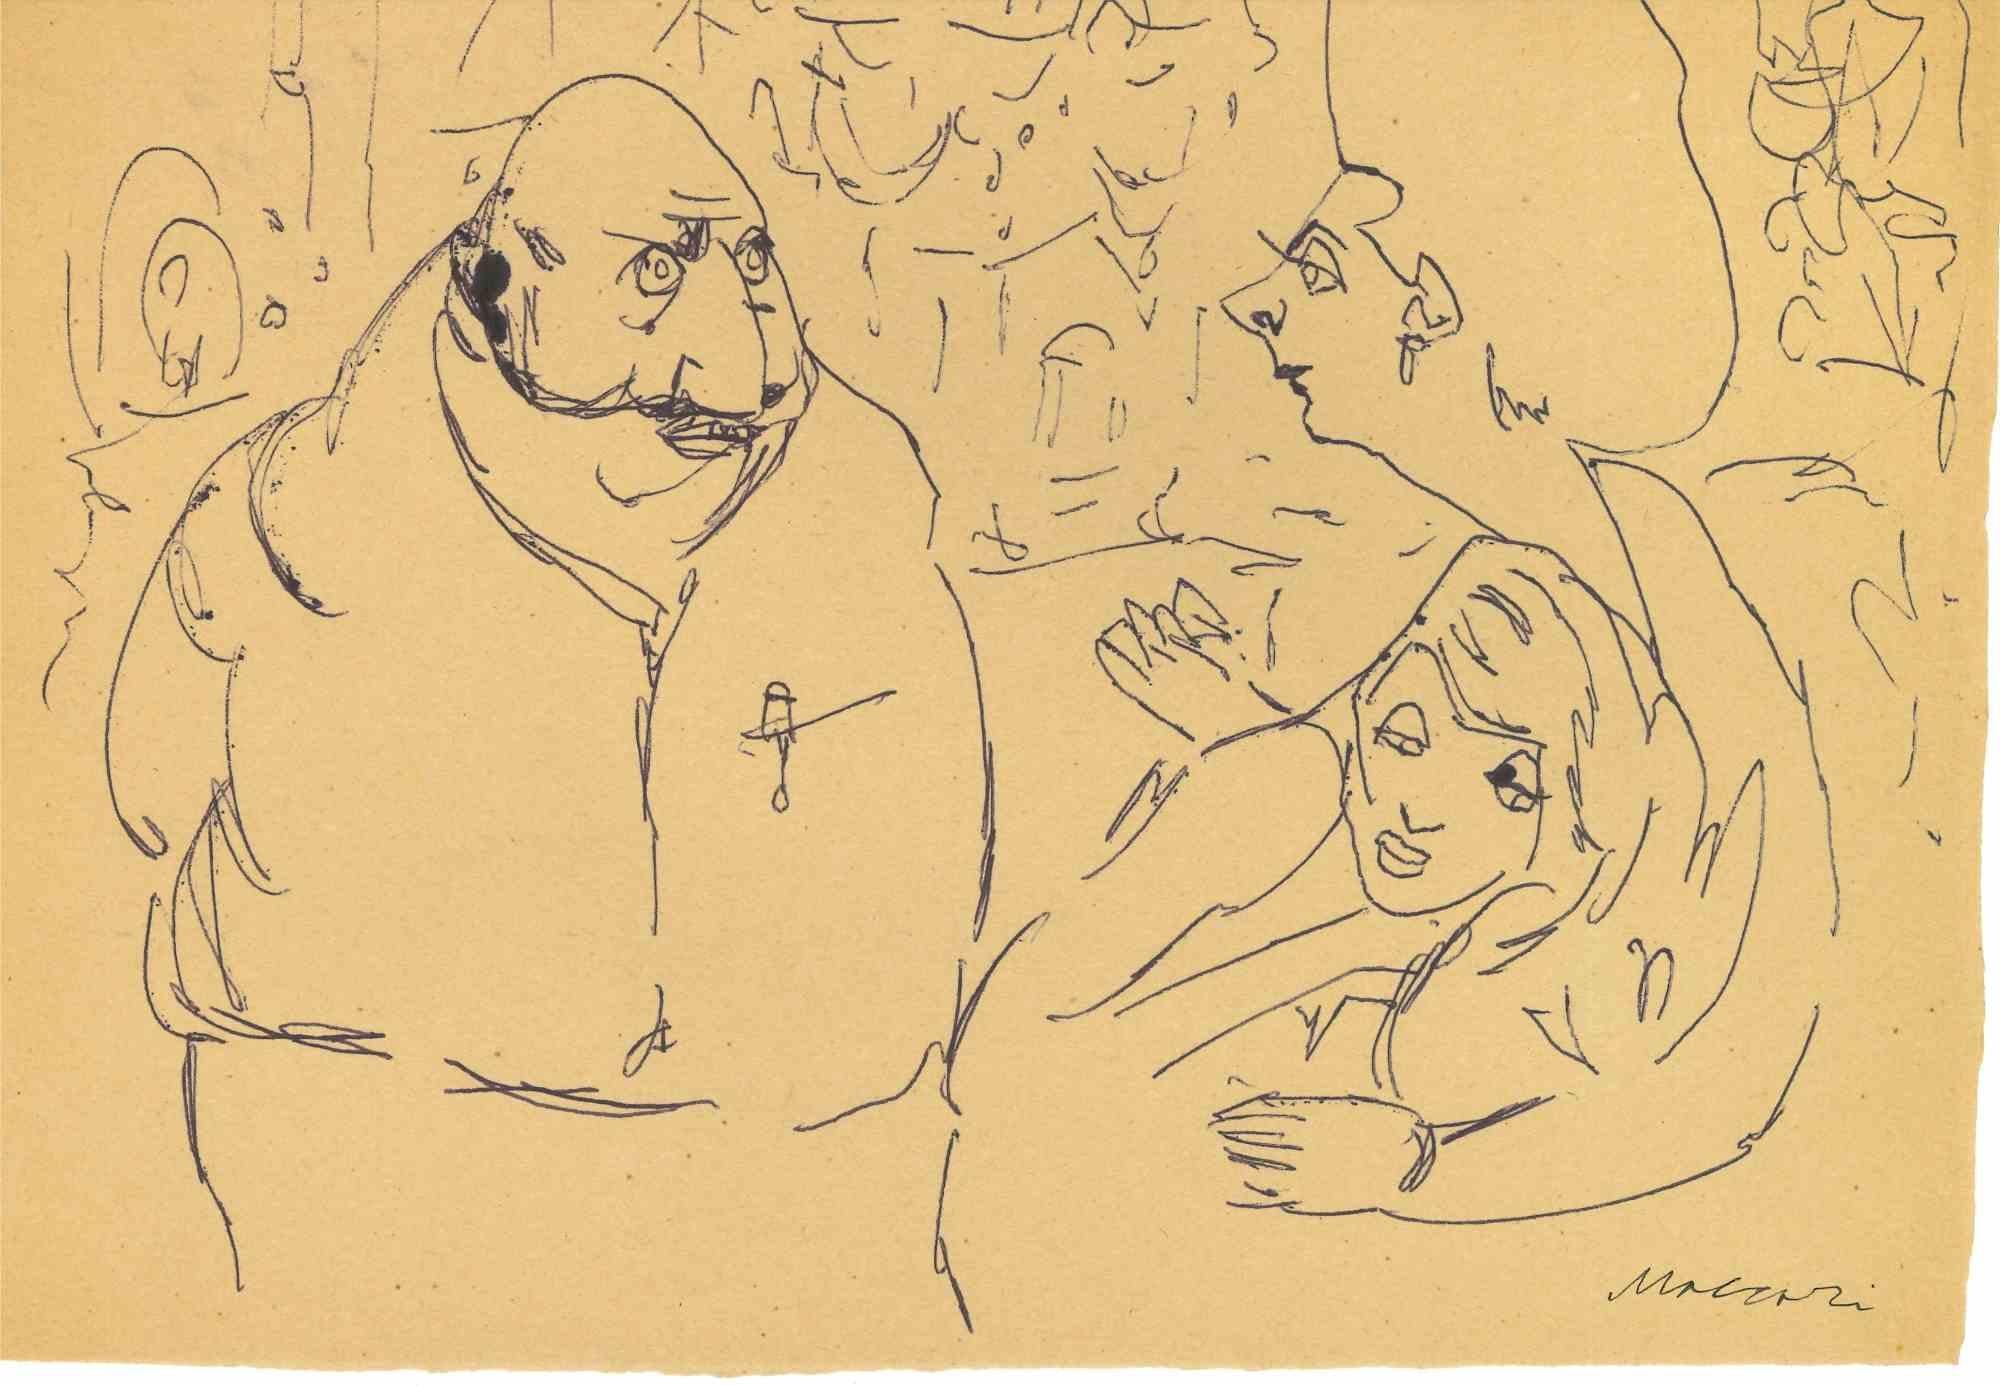 Conversation is a pen drawing Artwork realized by Mino Maccari  (1924-1989) in the Mid-20th Century.

Hand-signed.

Good conditions with slight foxing.

Mino Maccari (Siena, 1924-Rome, June 16, 1989) was an Italian writer, painter, engraver and